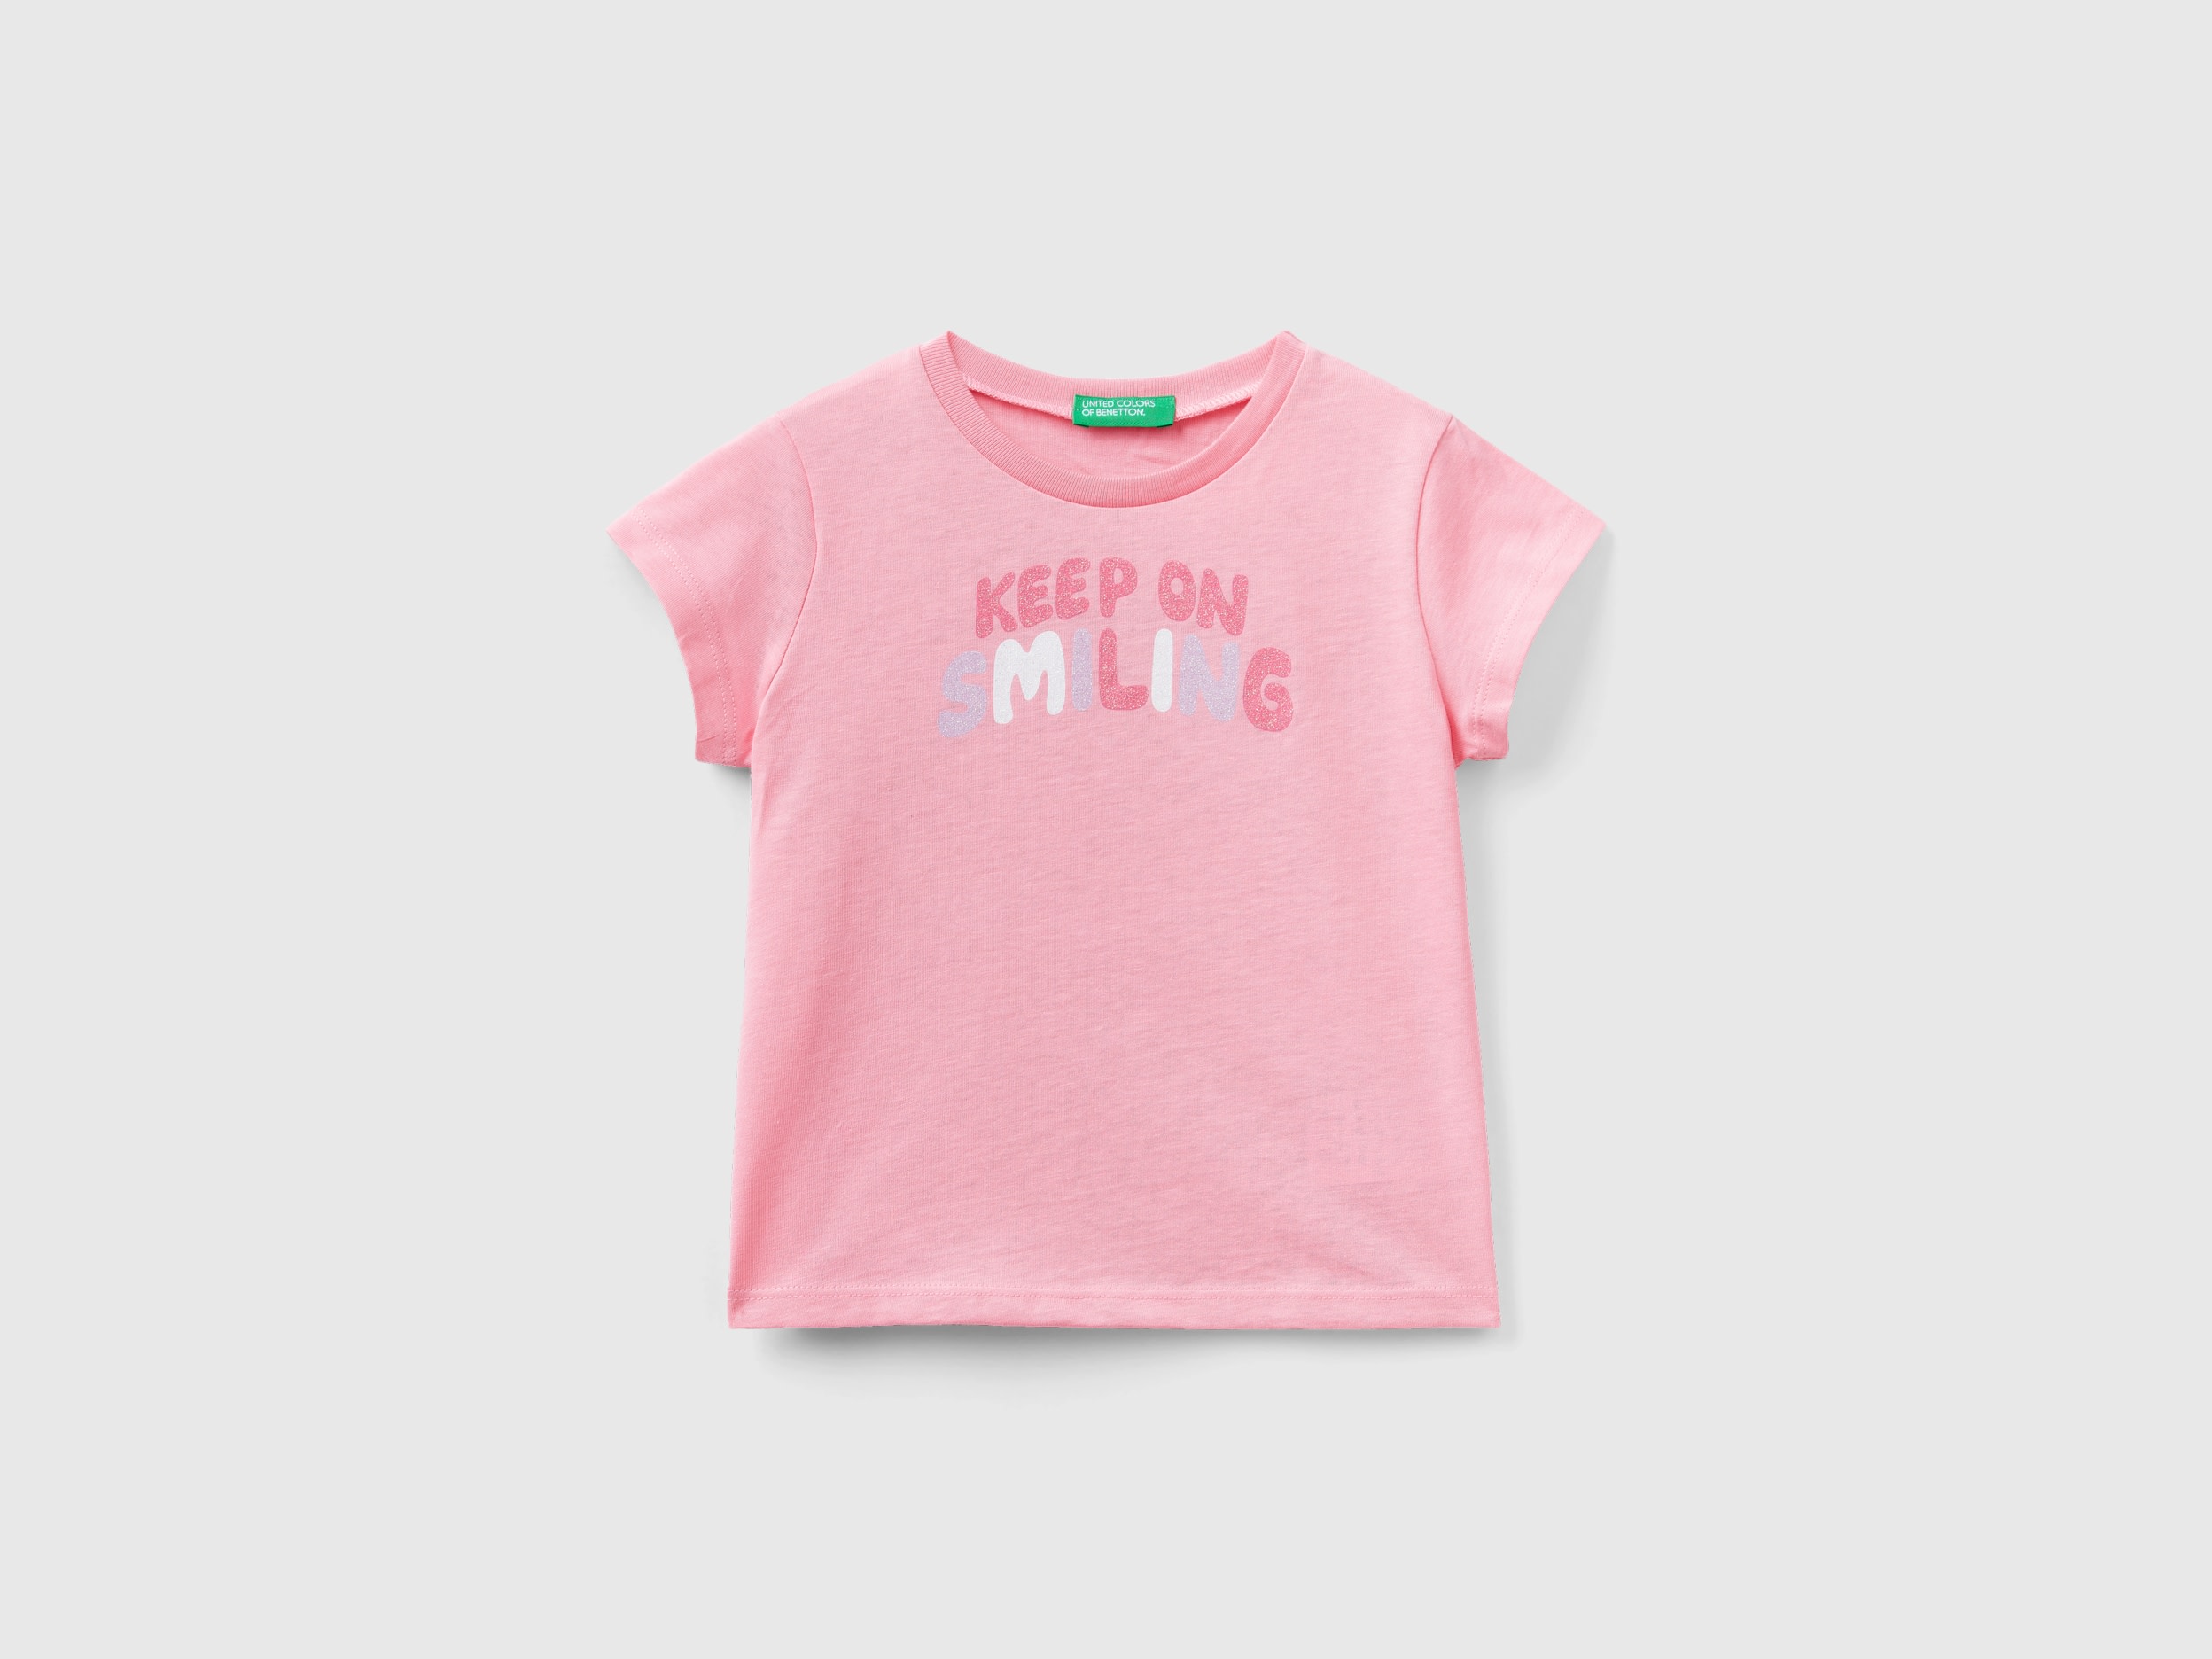 Benetton, T-shirt In Organic Cotton With Glitter, size 5-6, Pink, Kids